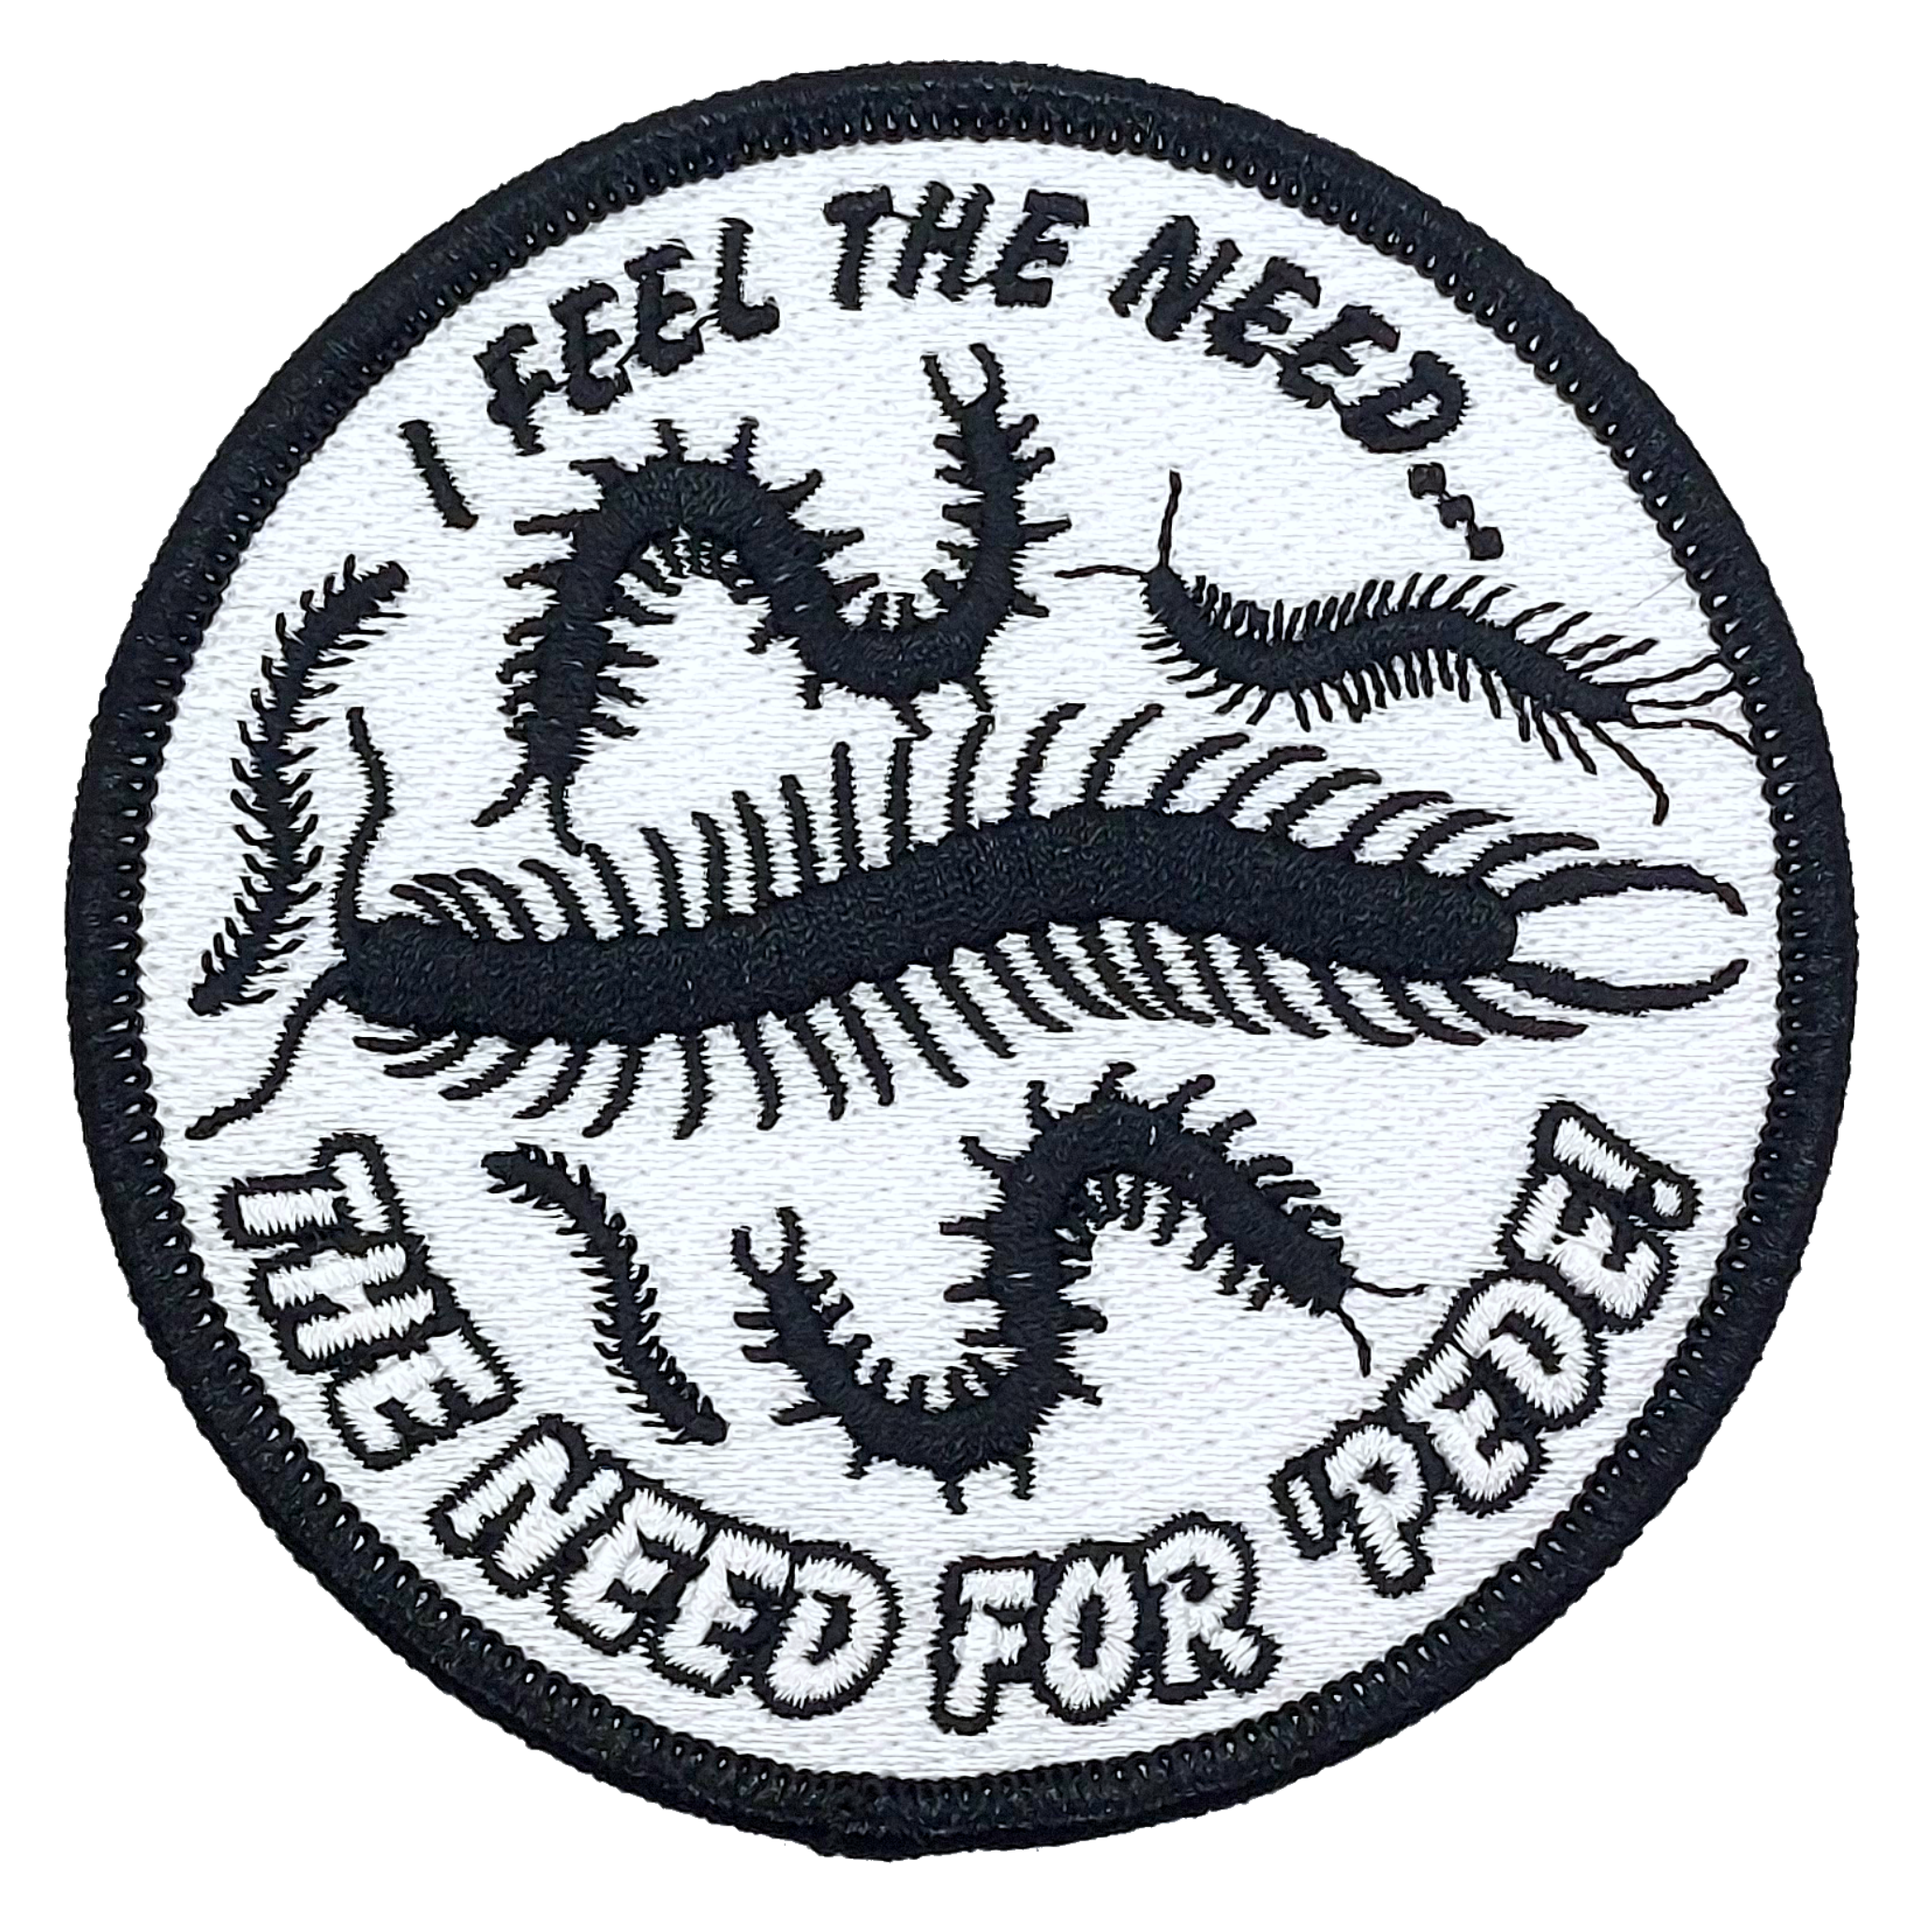  I Feel The Need for Speed Patch, Biker Sayings Patches